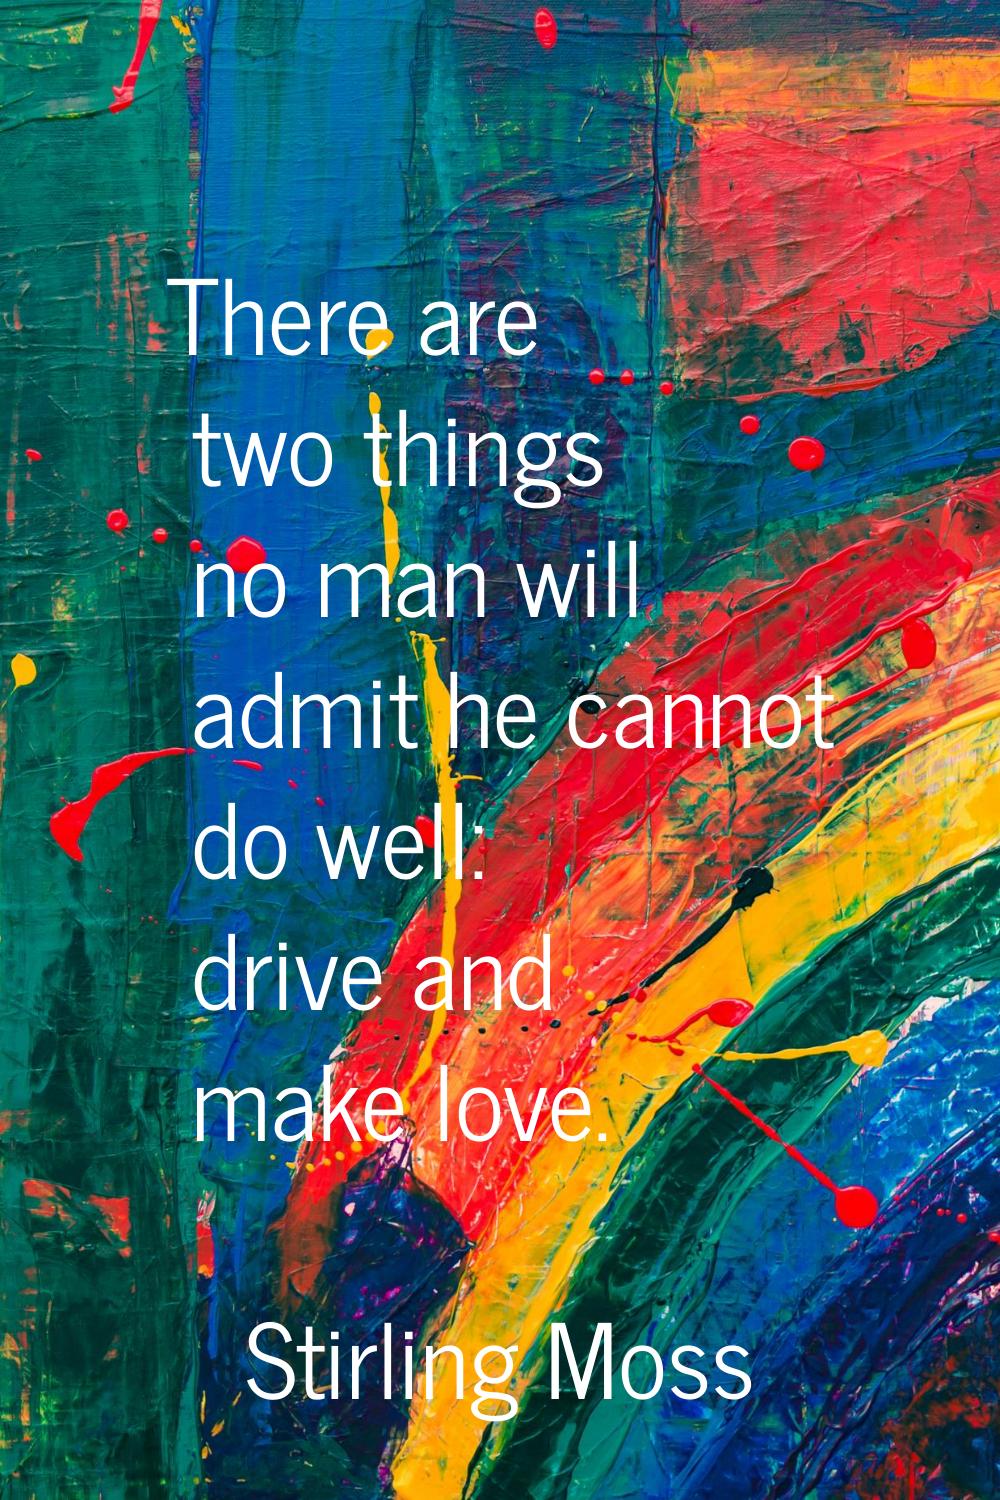 There are two things no man will admit he cannot do well: drive and make love.